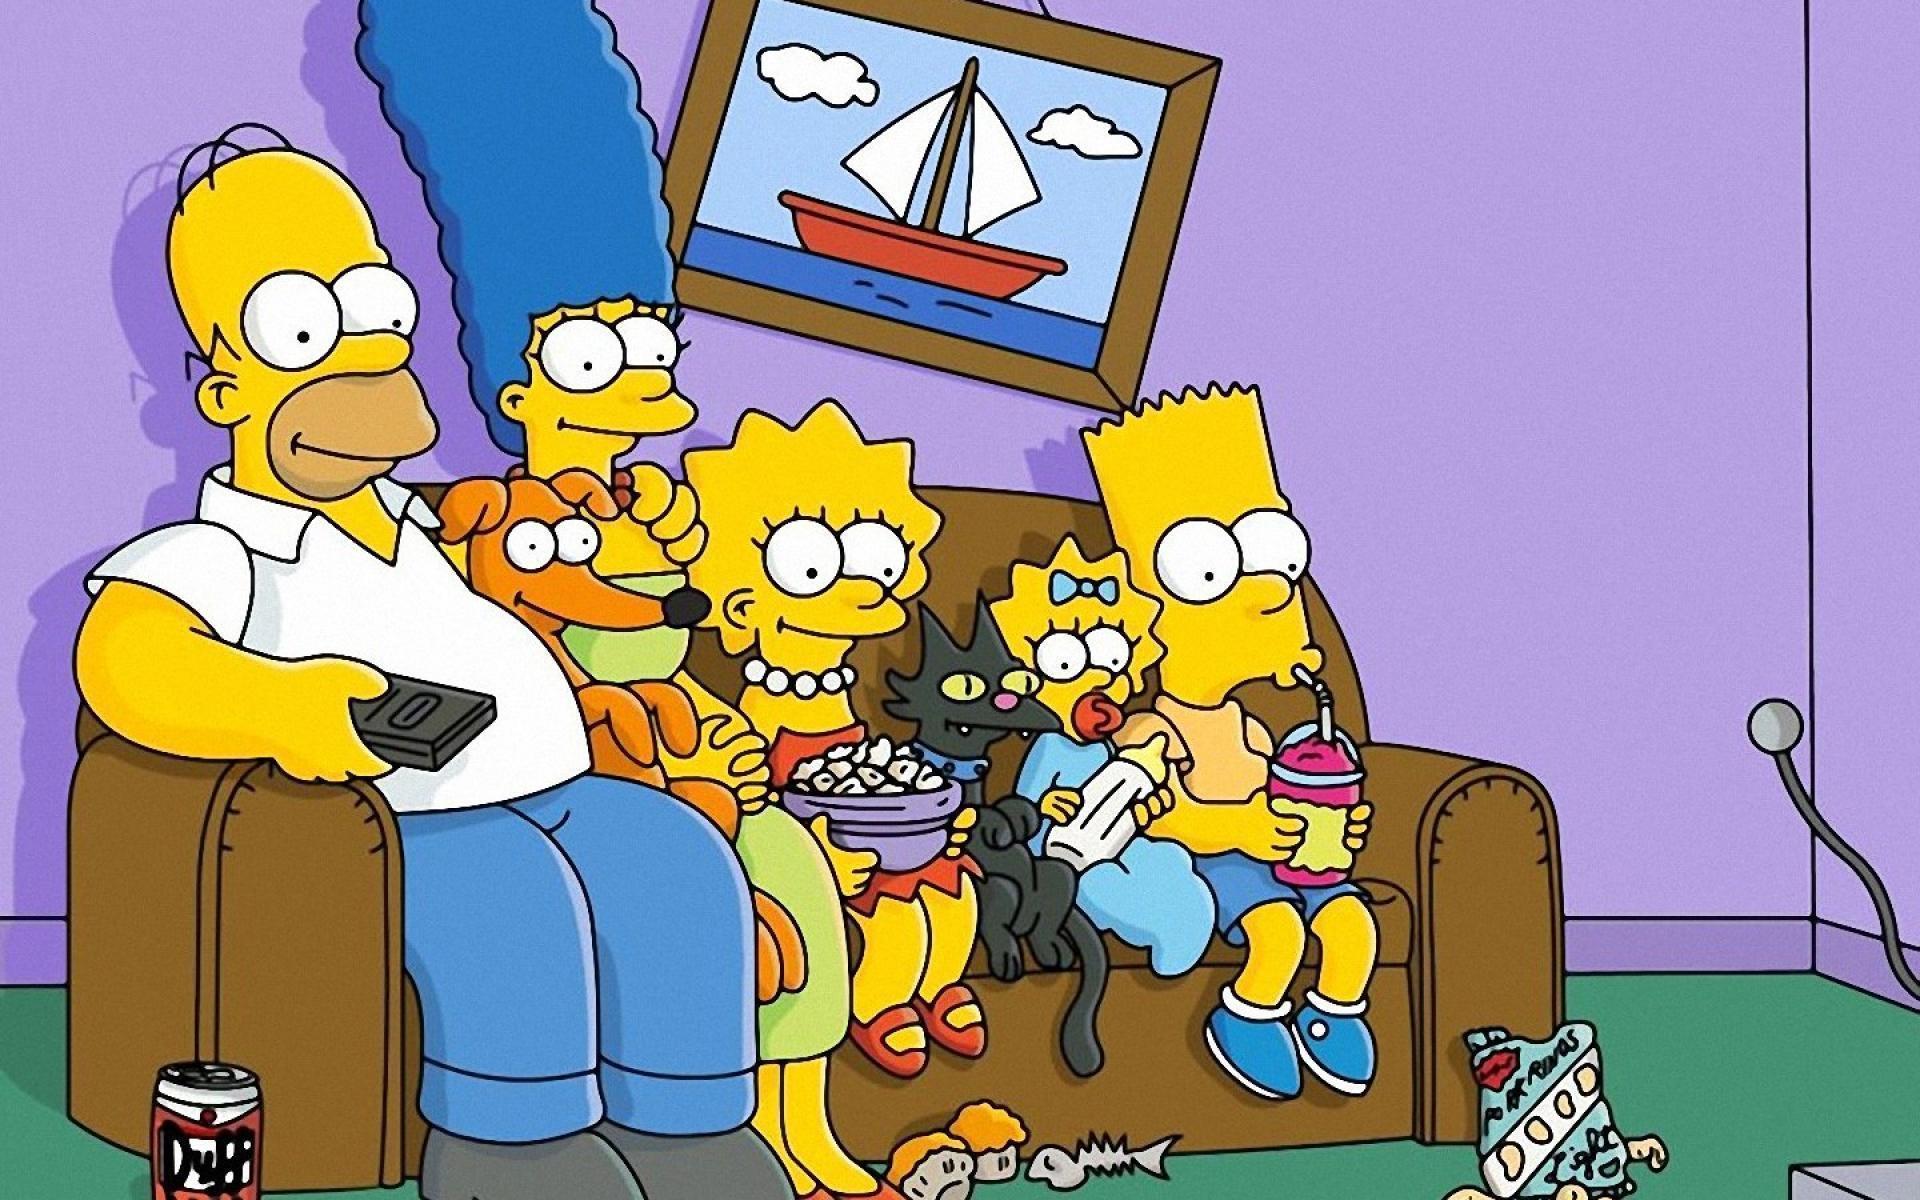 image about SIMPSONS WALLPAPERS. The simpsons